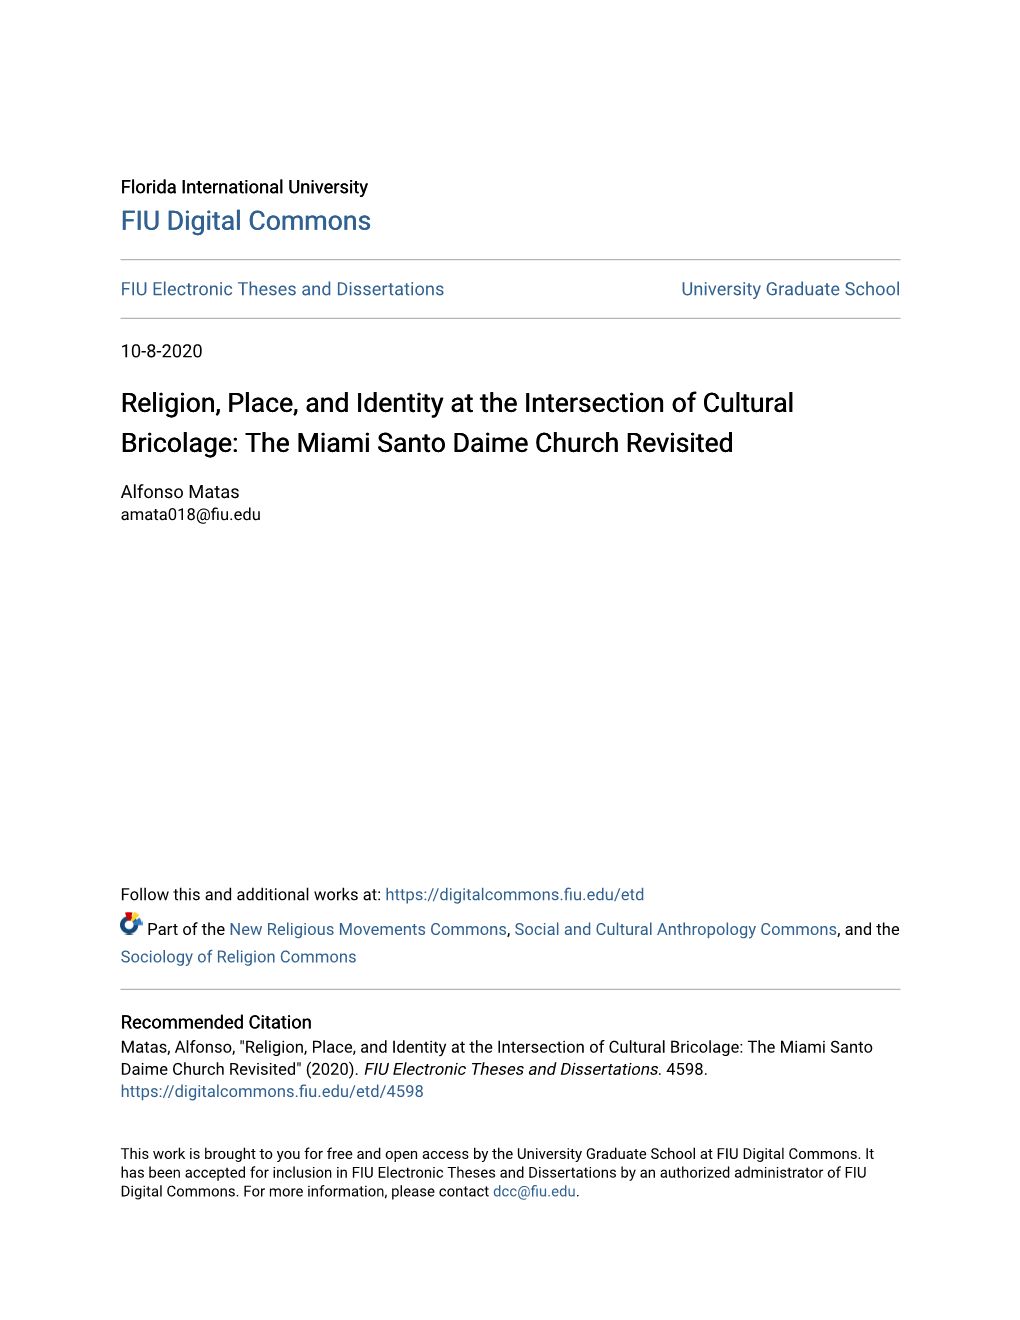 Religion, Place, and Identity at the Intersection of Cultural Bricolage: the Miami Santo Daime Church Revisited